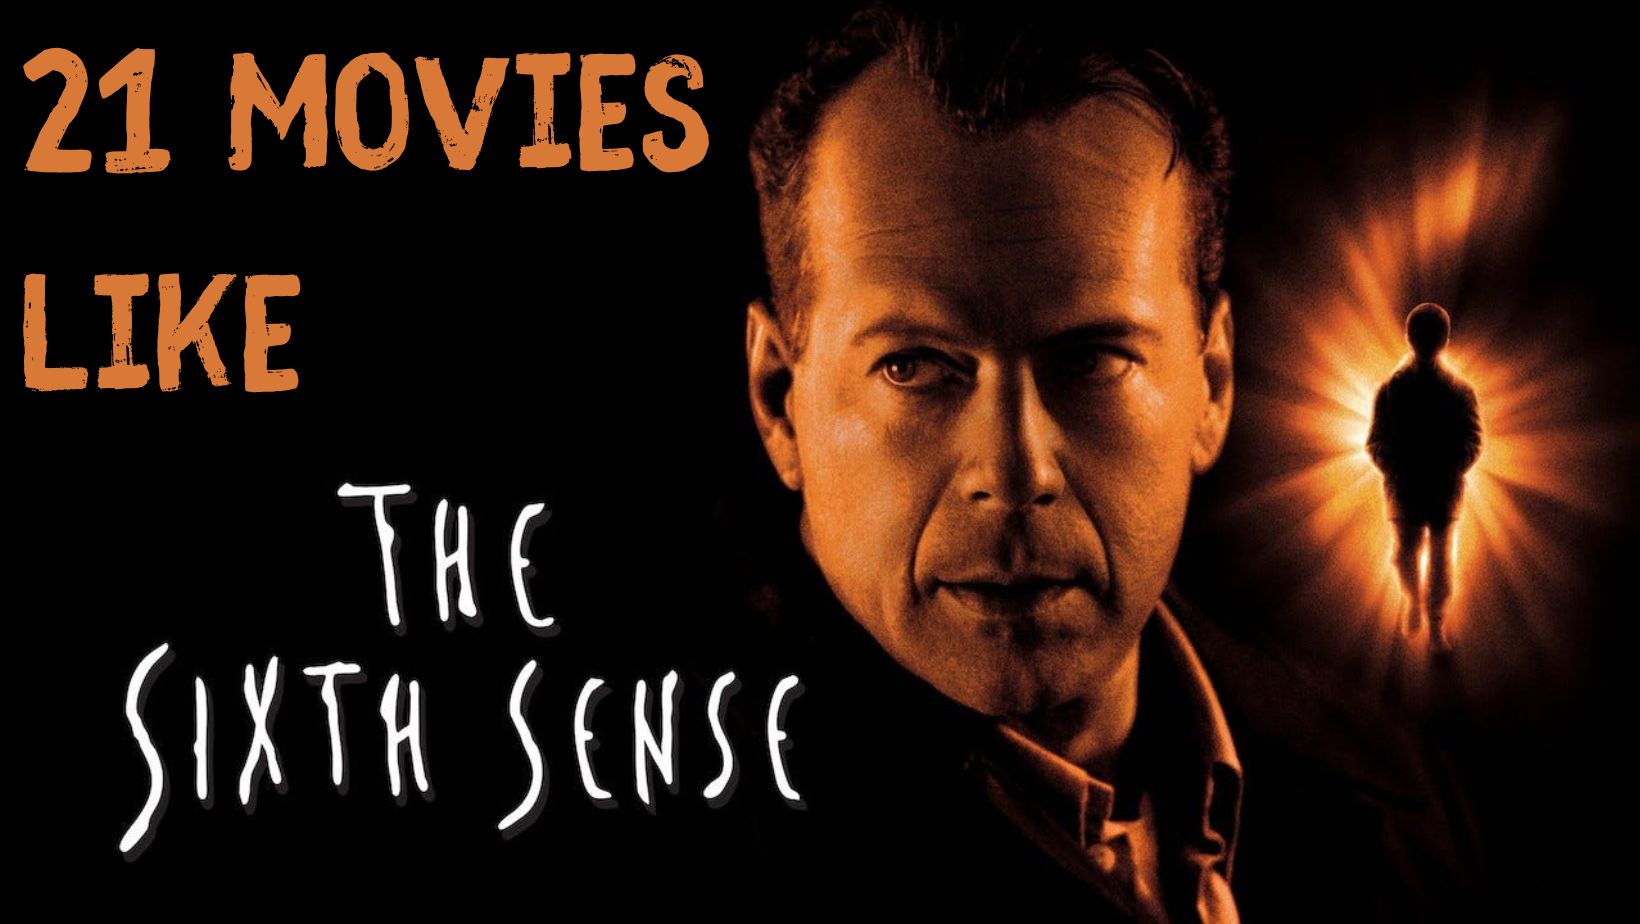 image from the sixth sense of man and boy with text "Movies Like The Sixth Sense"